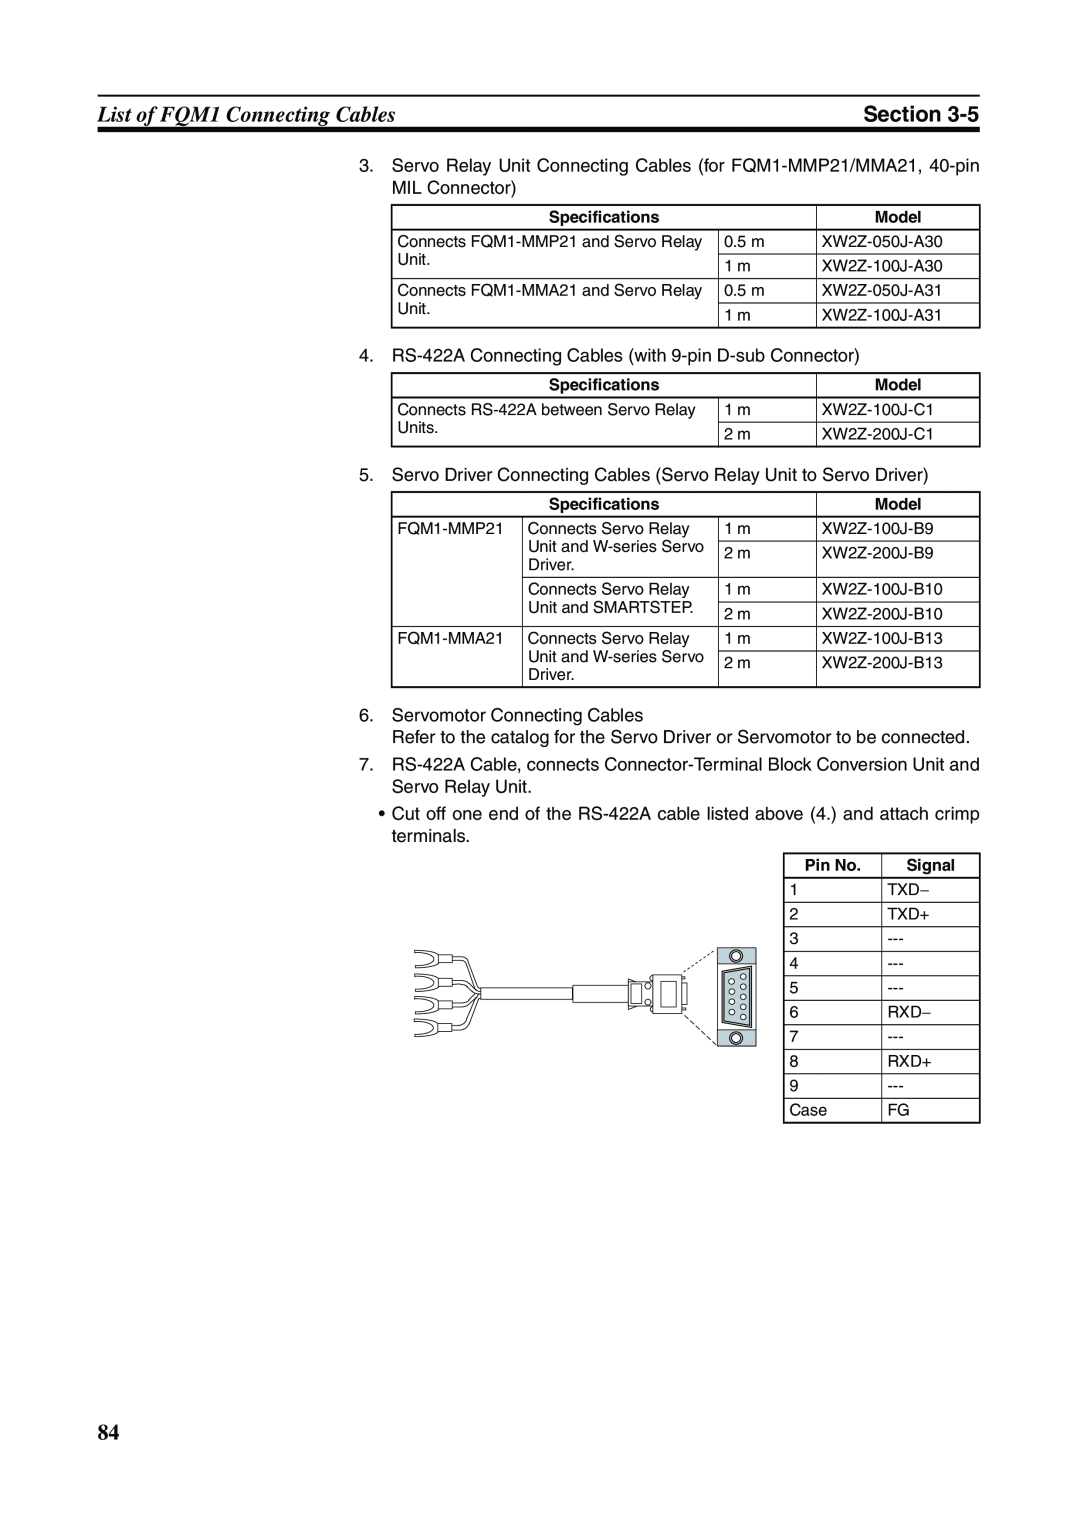 Omron FQM1-MMP21, FQM1-CM001, FQM1-MMA21 List of FQM1 Connecting Cables, Section, Servomotor Connecting Cables 